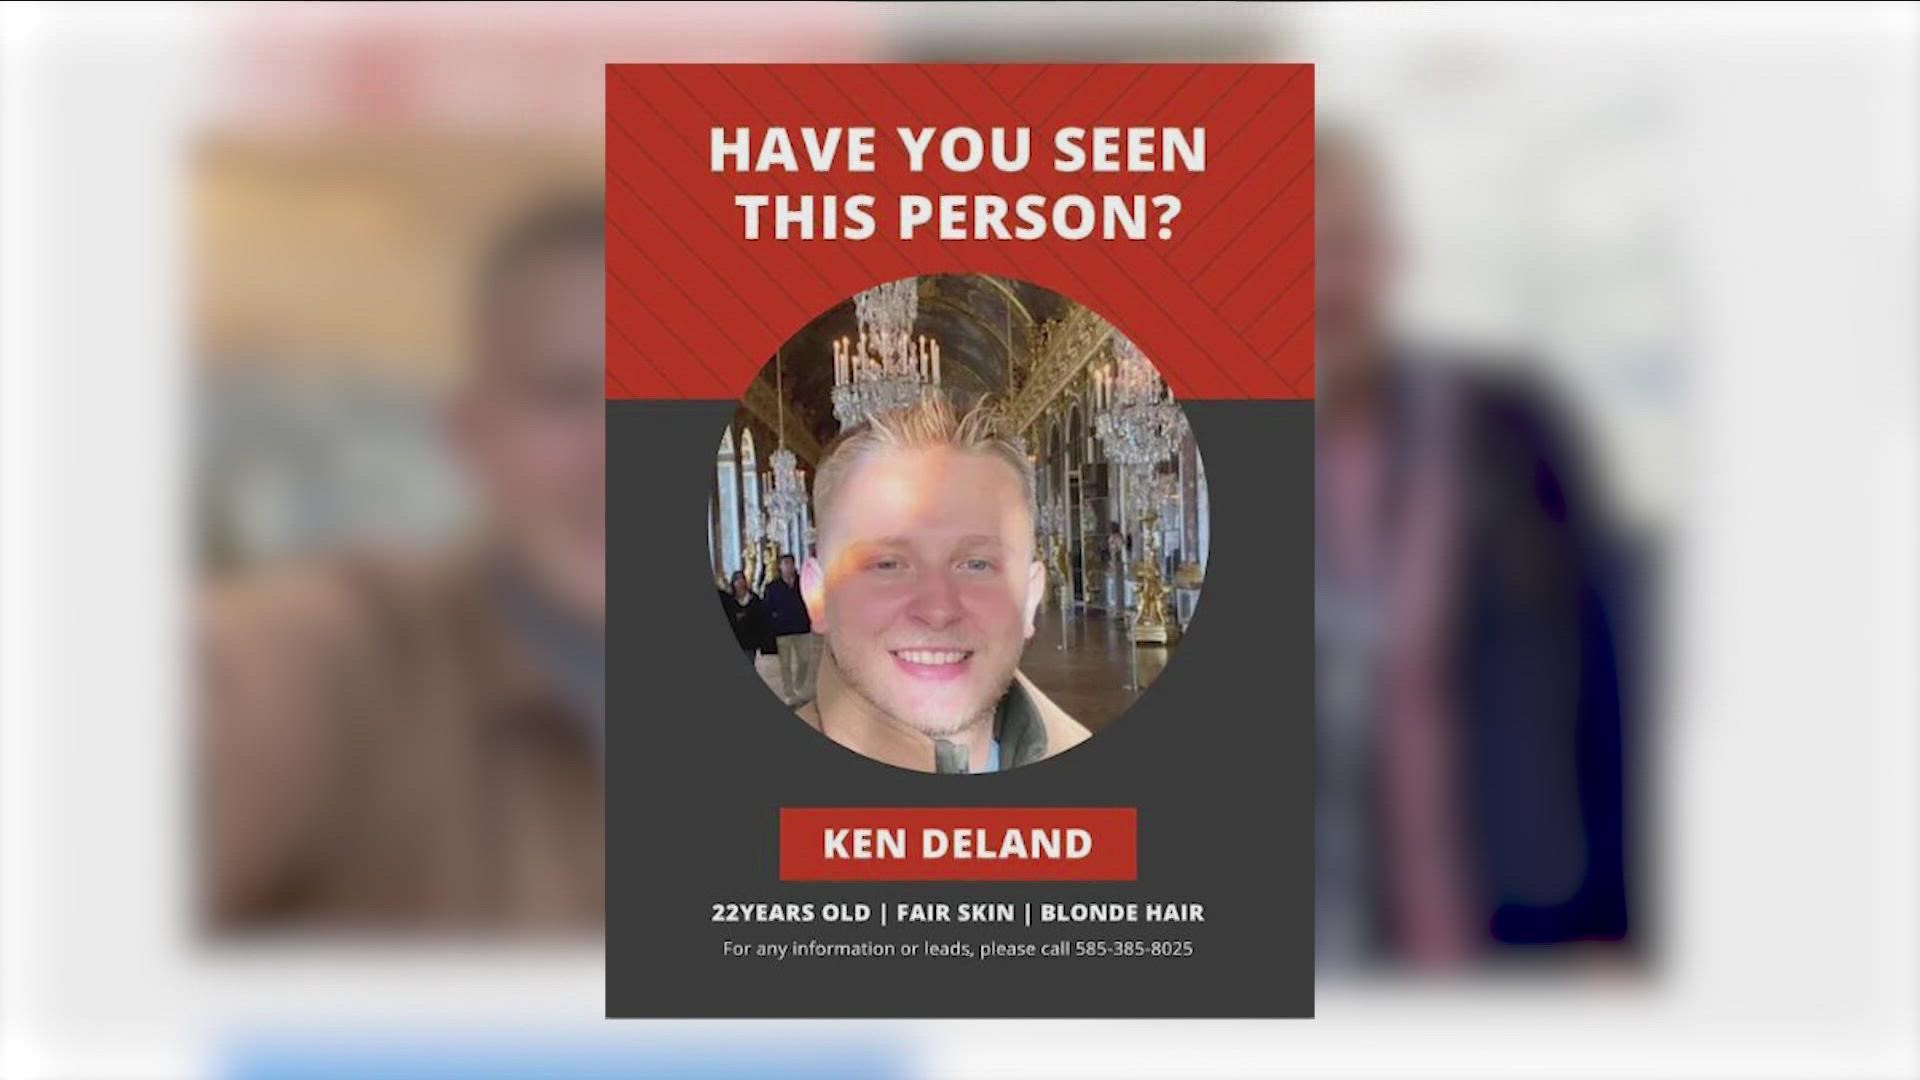 Kenny DeLand hasn't been heard from in almost 2 weeks and was reported missing to French police on November 29.